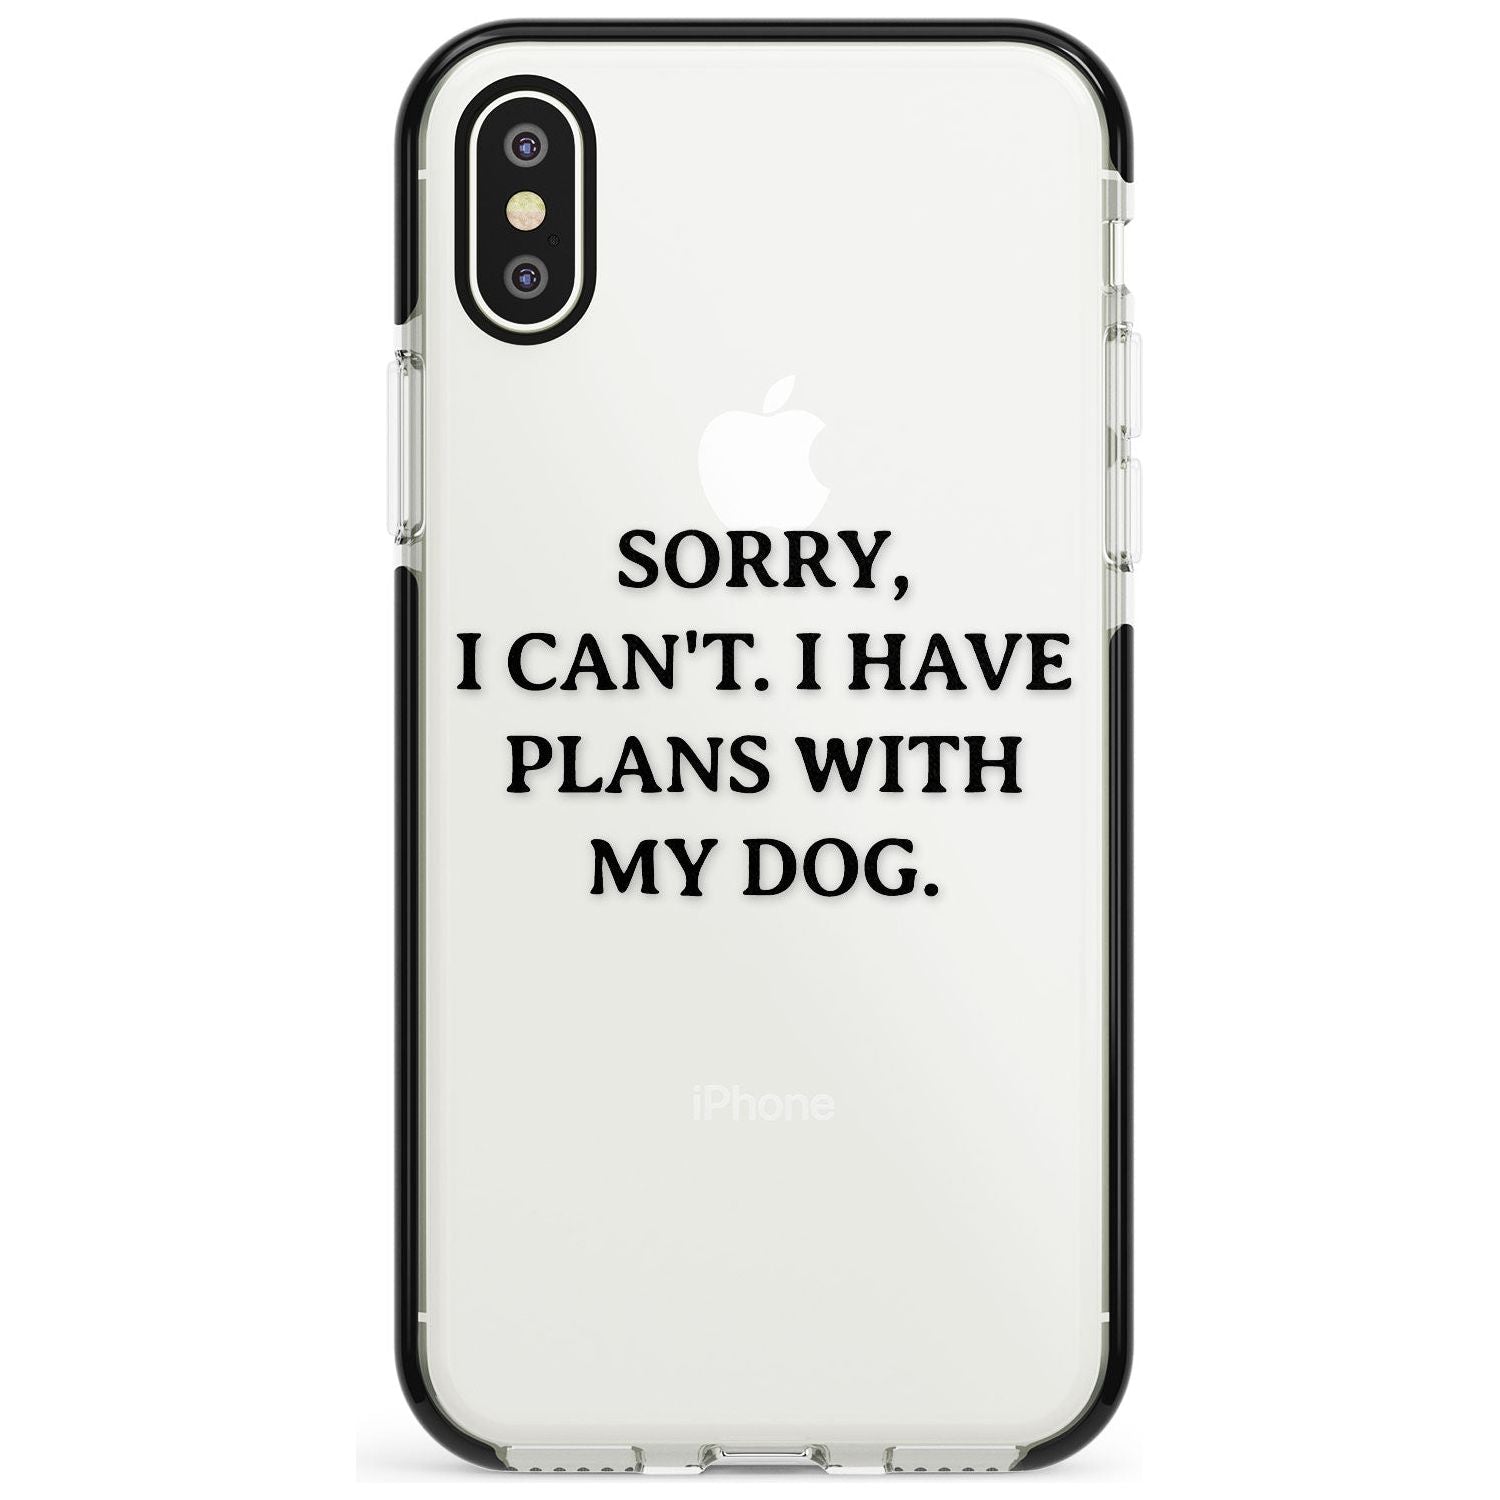 Plans with Dog Black Impact Phone Case for iPhone X XS Max XR